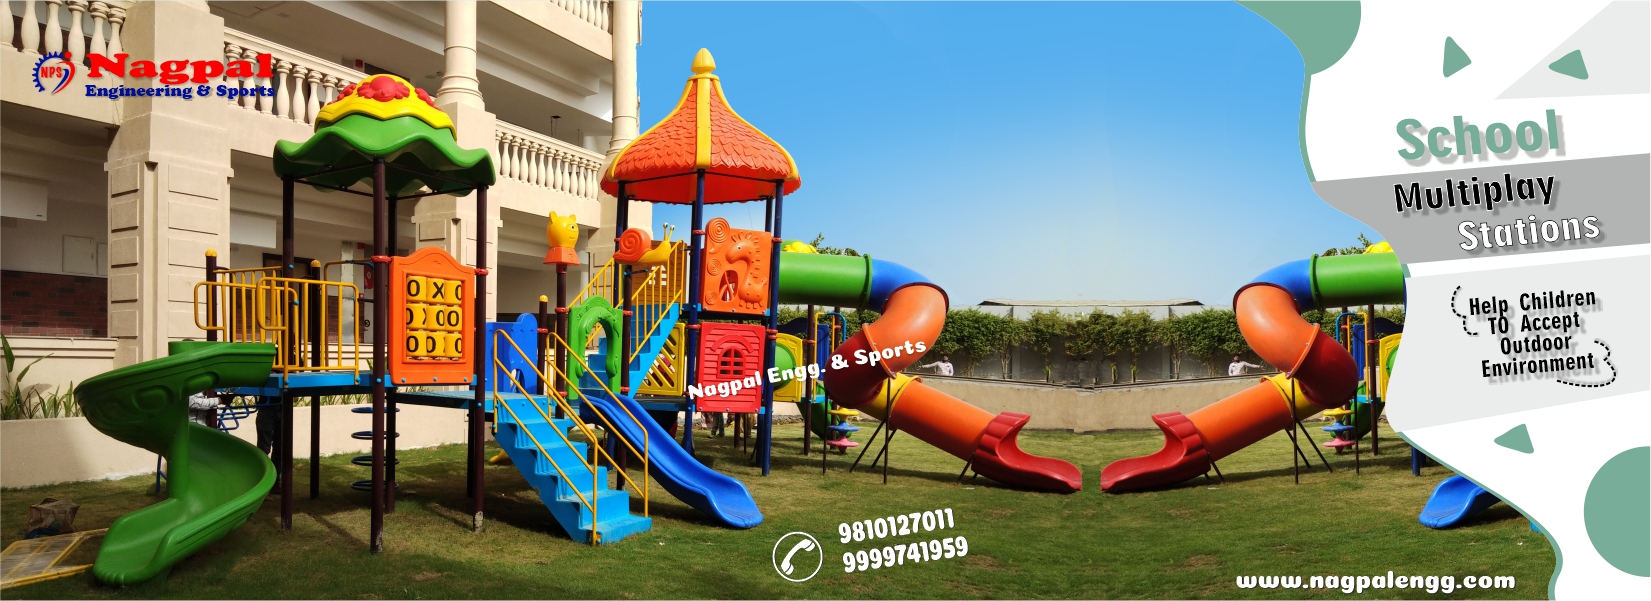 Roto Multiplay System Manufacturers, Exporters & Suppliers in Gorakhpur